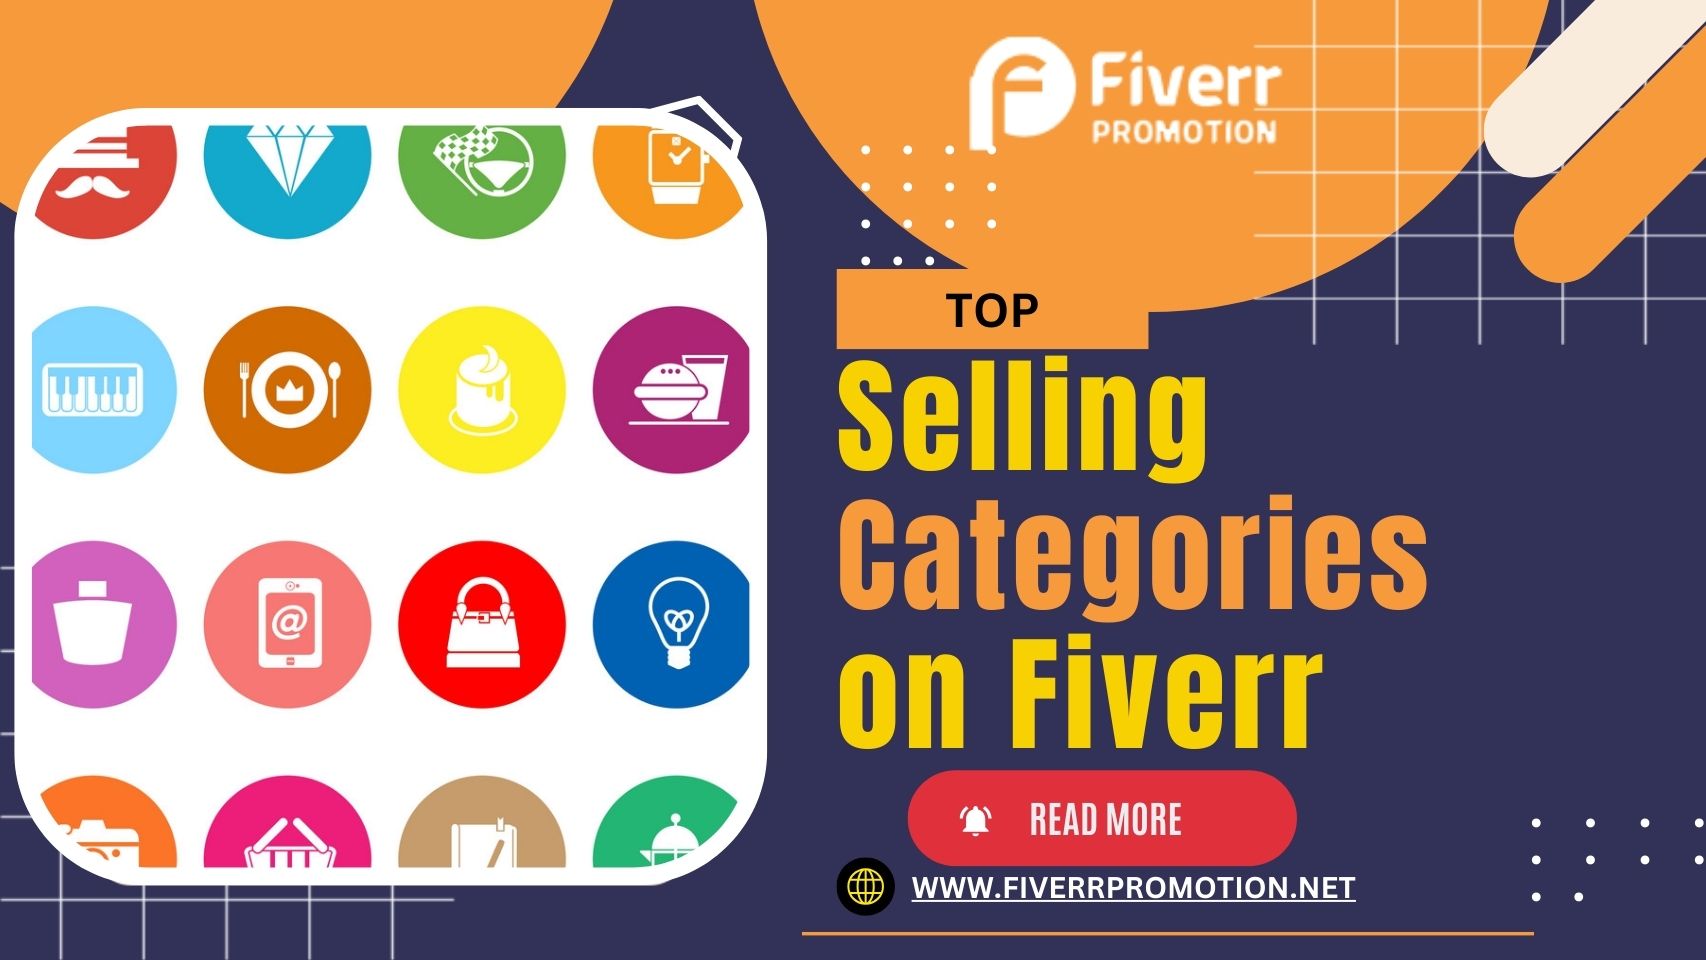 Top Selling Categories on Fiverr